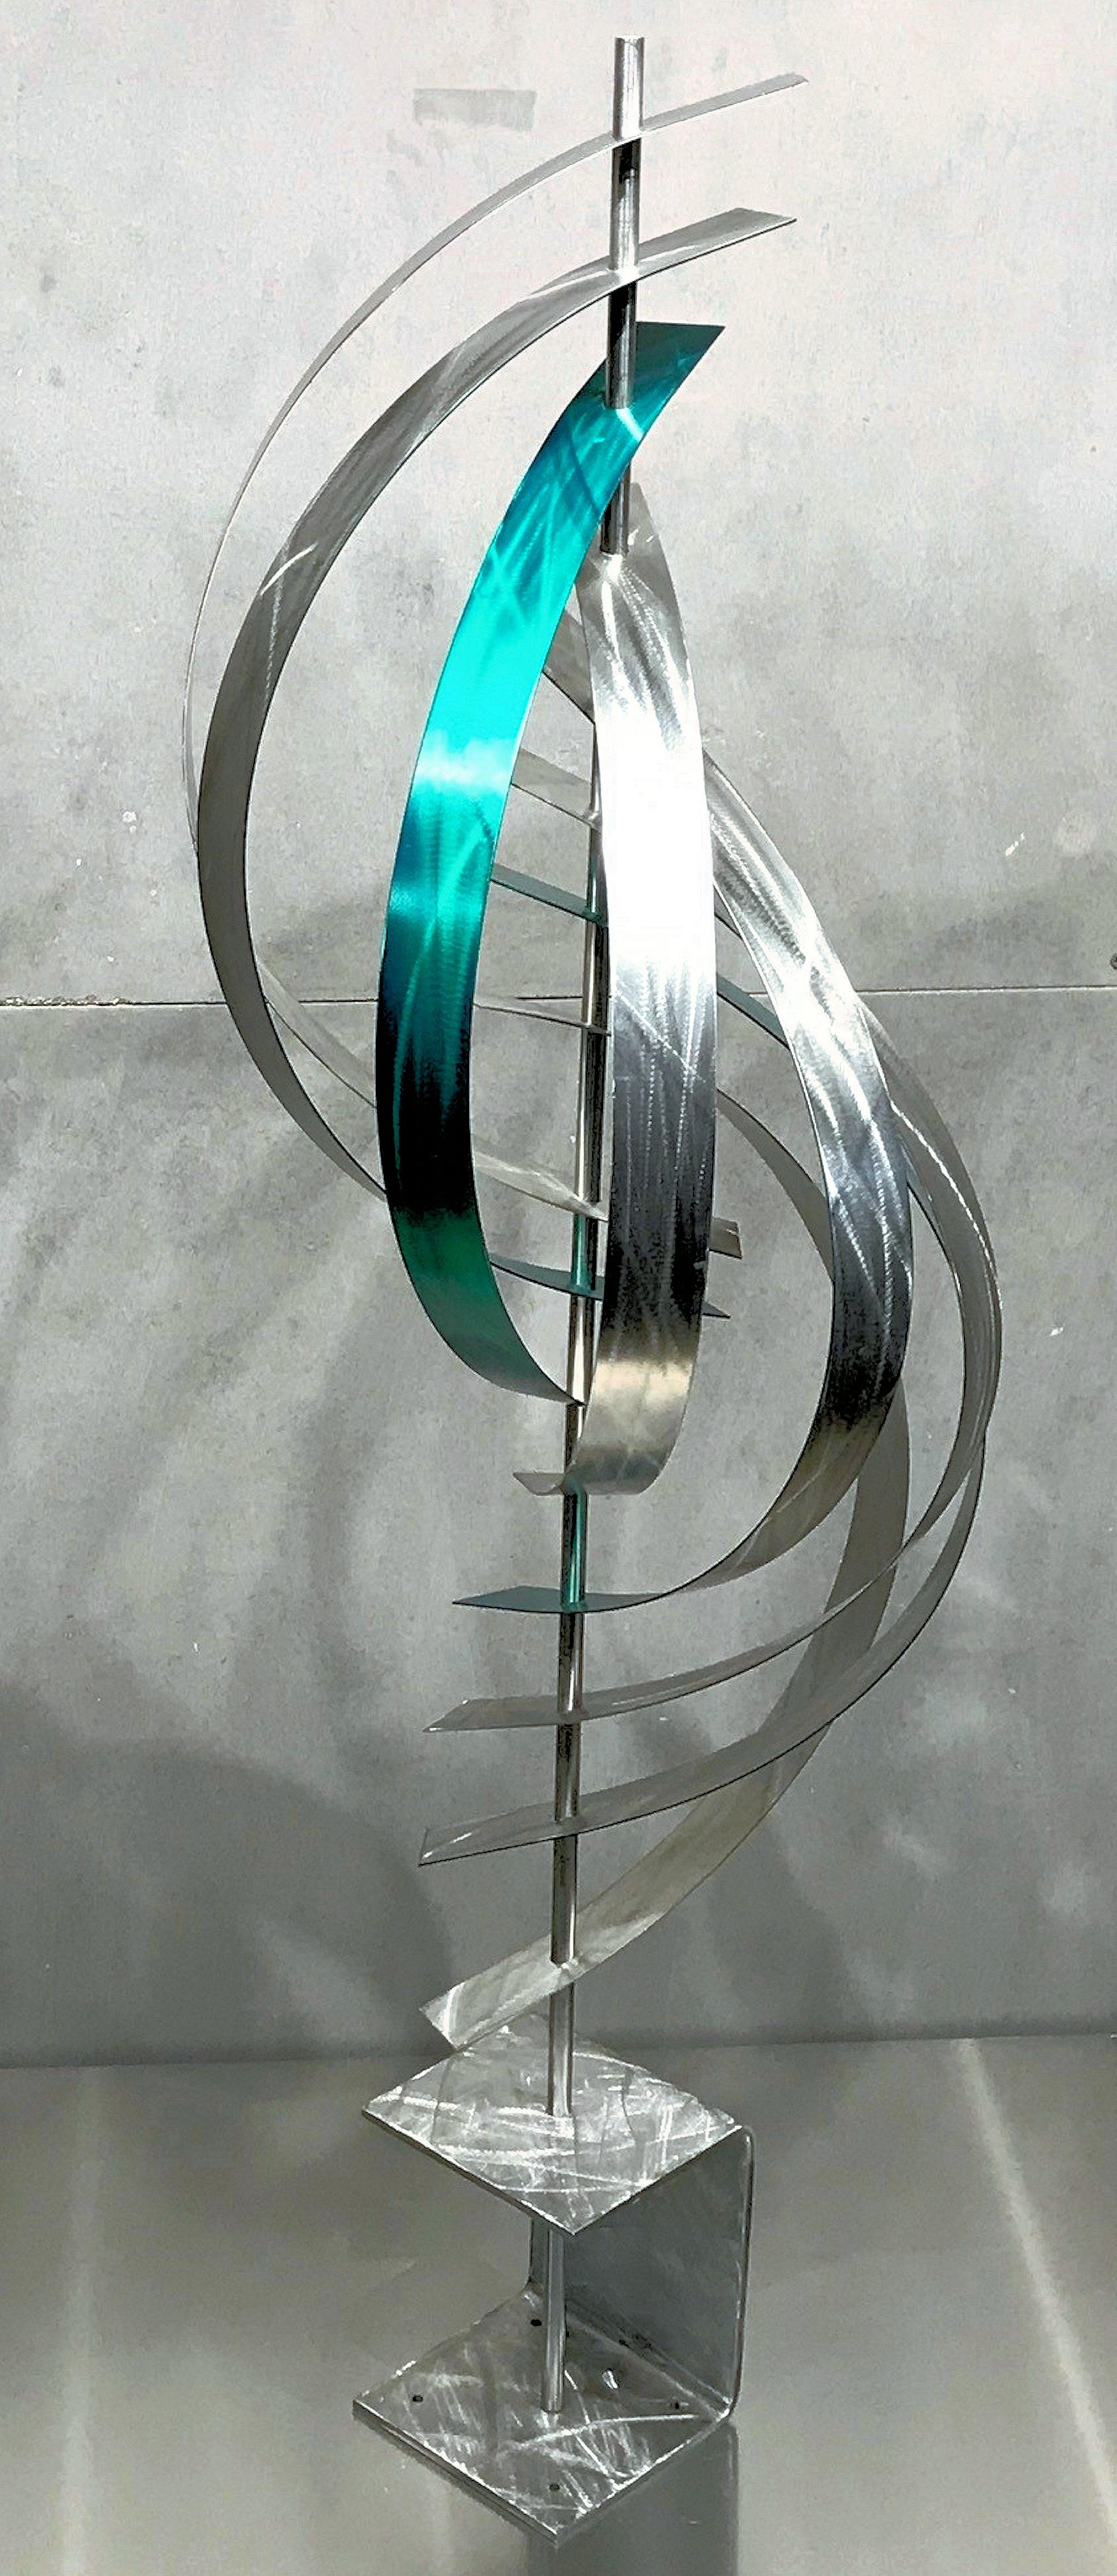 Modern Contemporary Metal Sculpture, Mid-Century Inspired Metal Art, by Jeff L. 2